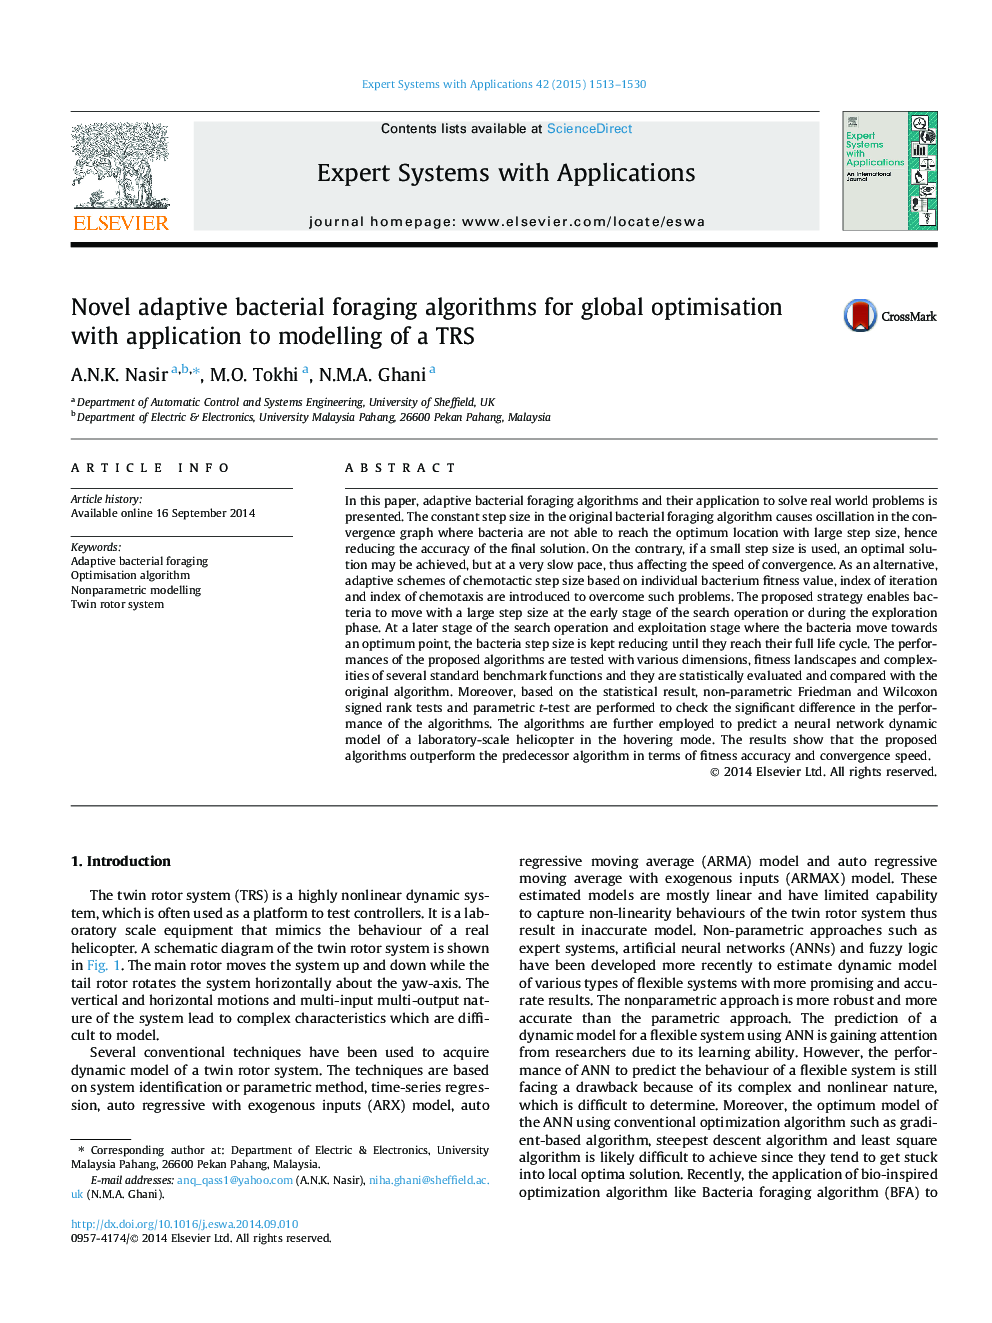 Novel adaptive bacterial foraging algorithms for global optimisation with application to modelling of a TRS